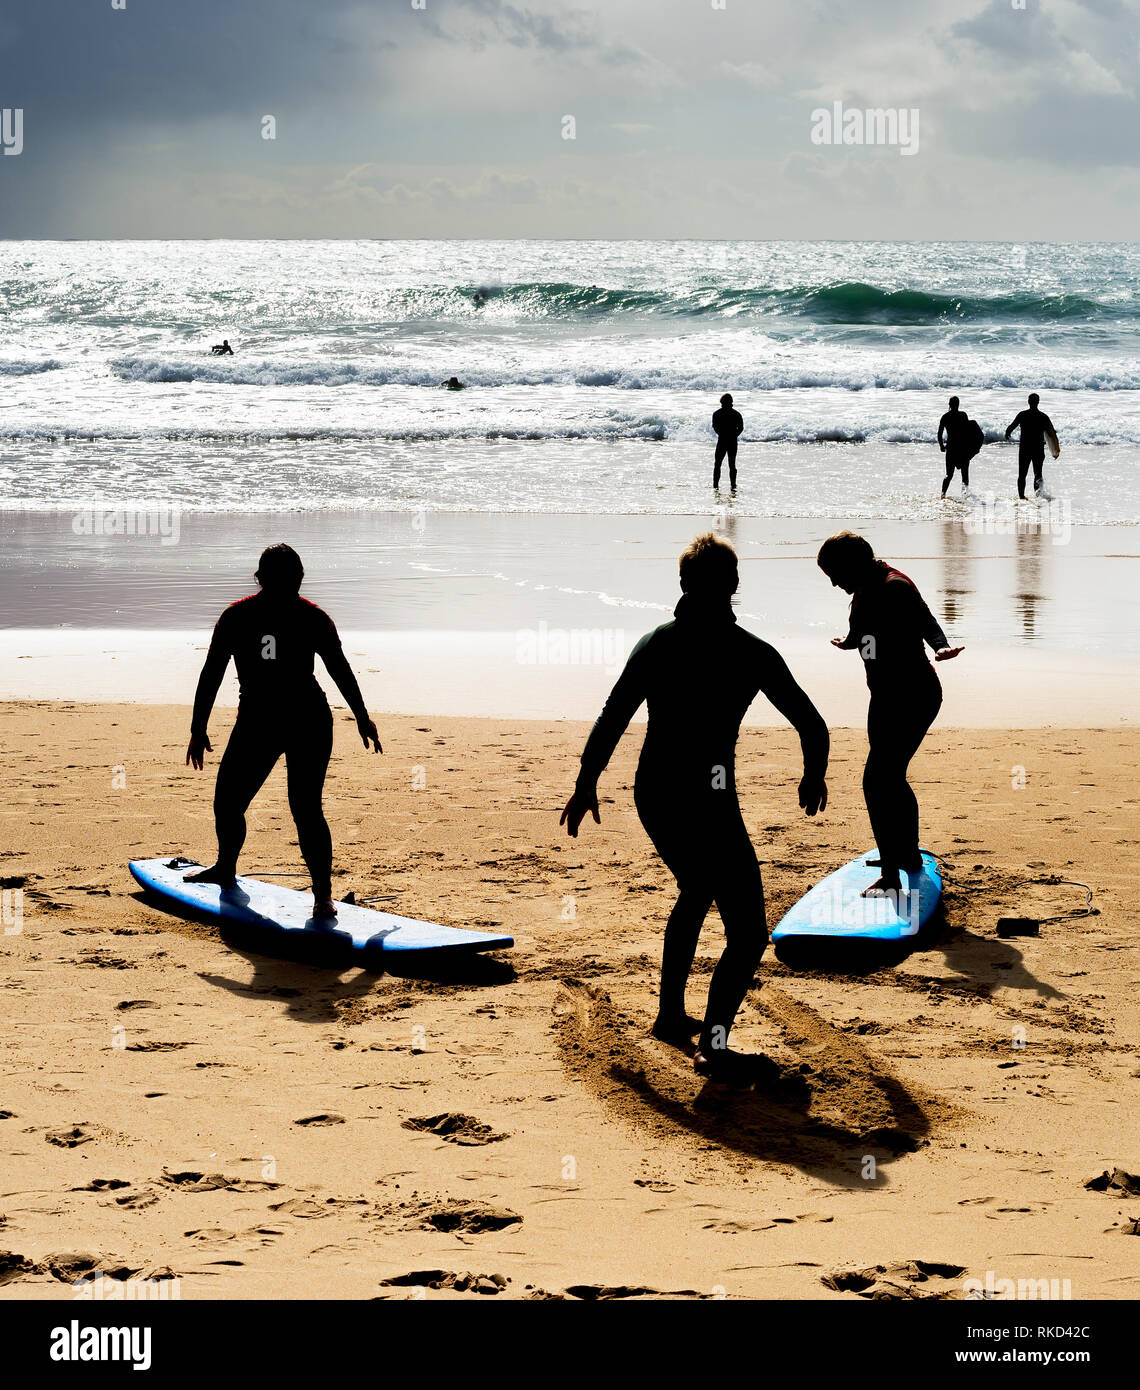 Surfing school learning how to surf at the beach. Portugal Stock Photo